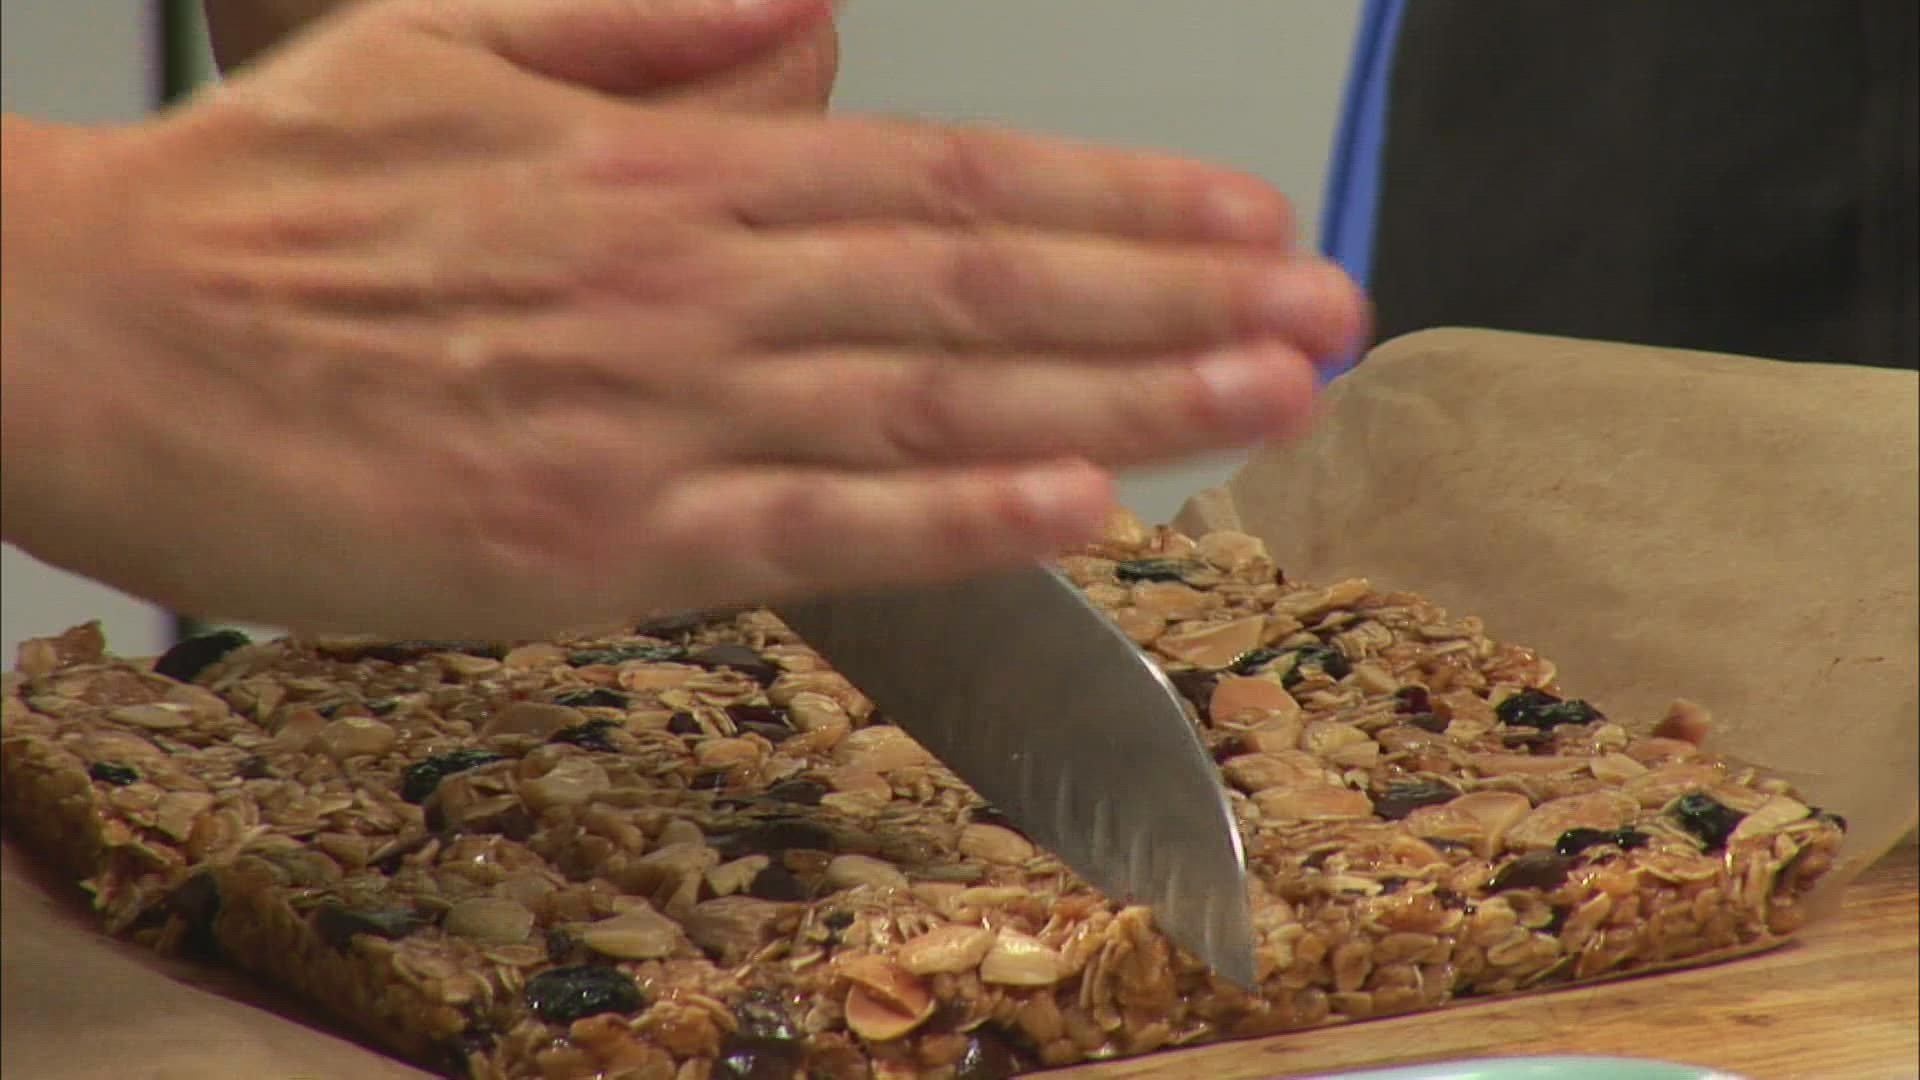 Vanessa Seder shows us how to make granola bars that are healthy and easy to take on the go.